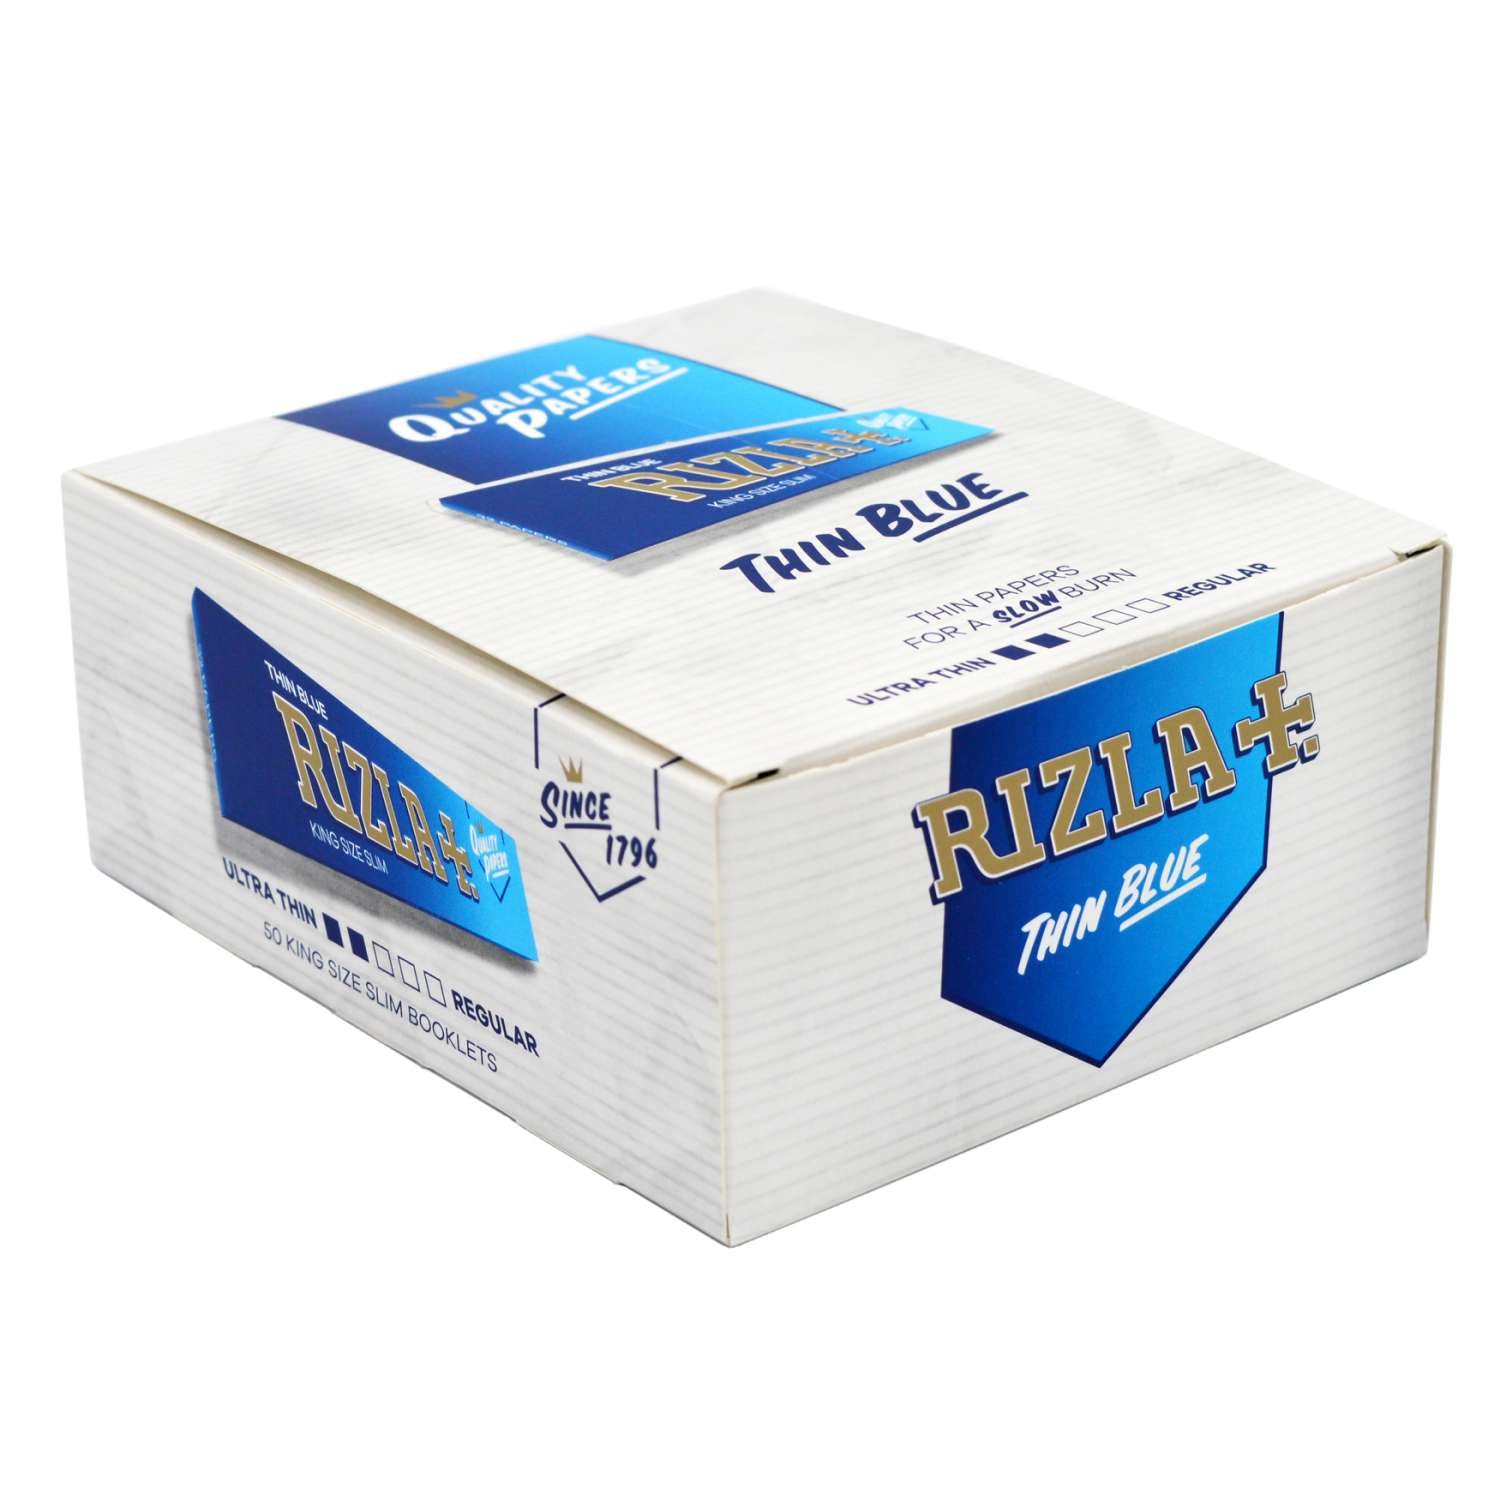 Rizla + Thin Blue Rolling Papers King Size (50 Pcs)